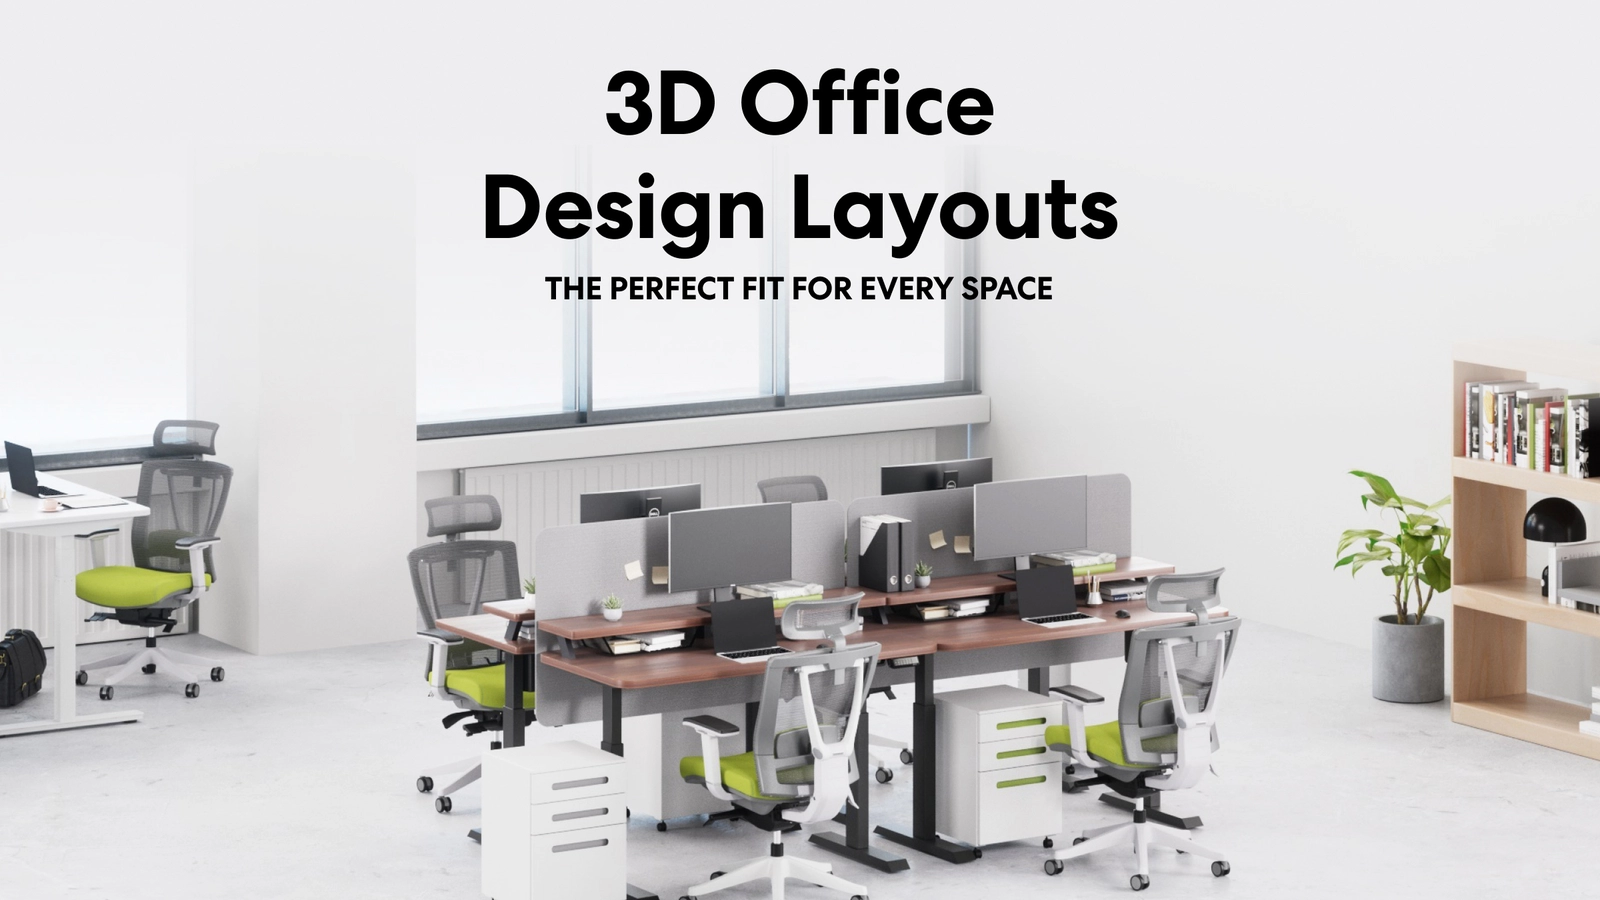 Find Your Ideal Office Layout with Bespoke 3D Designs